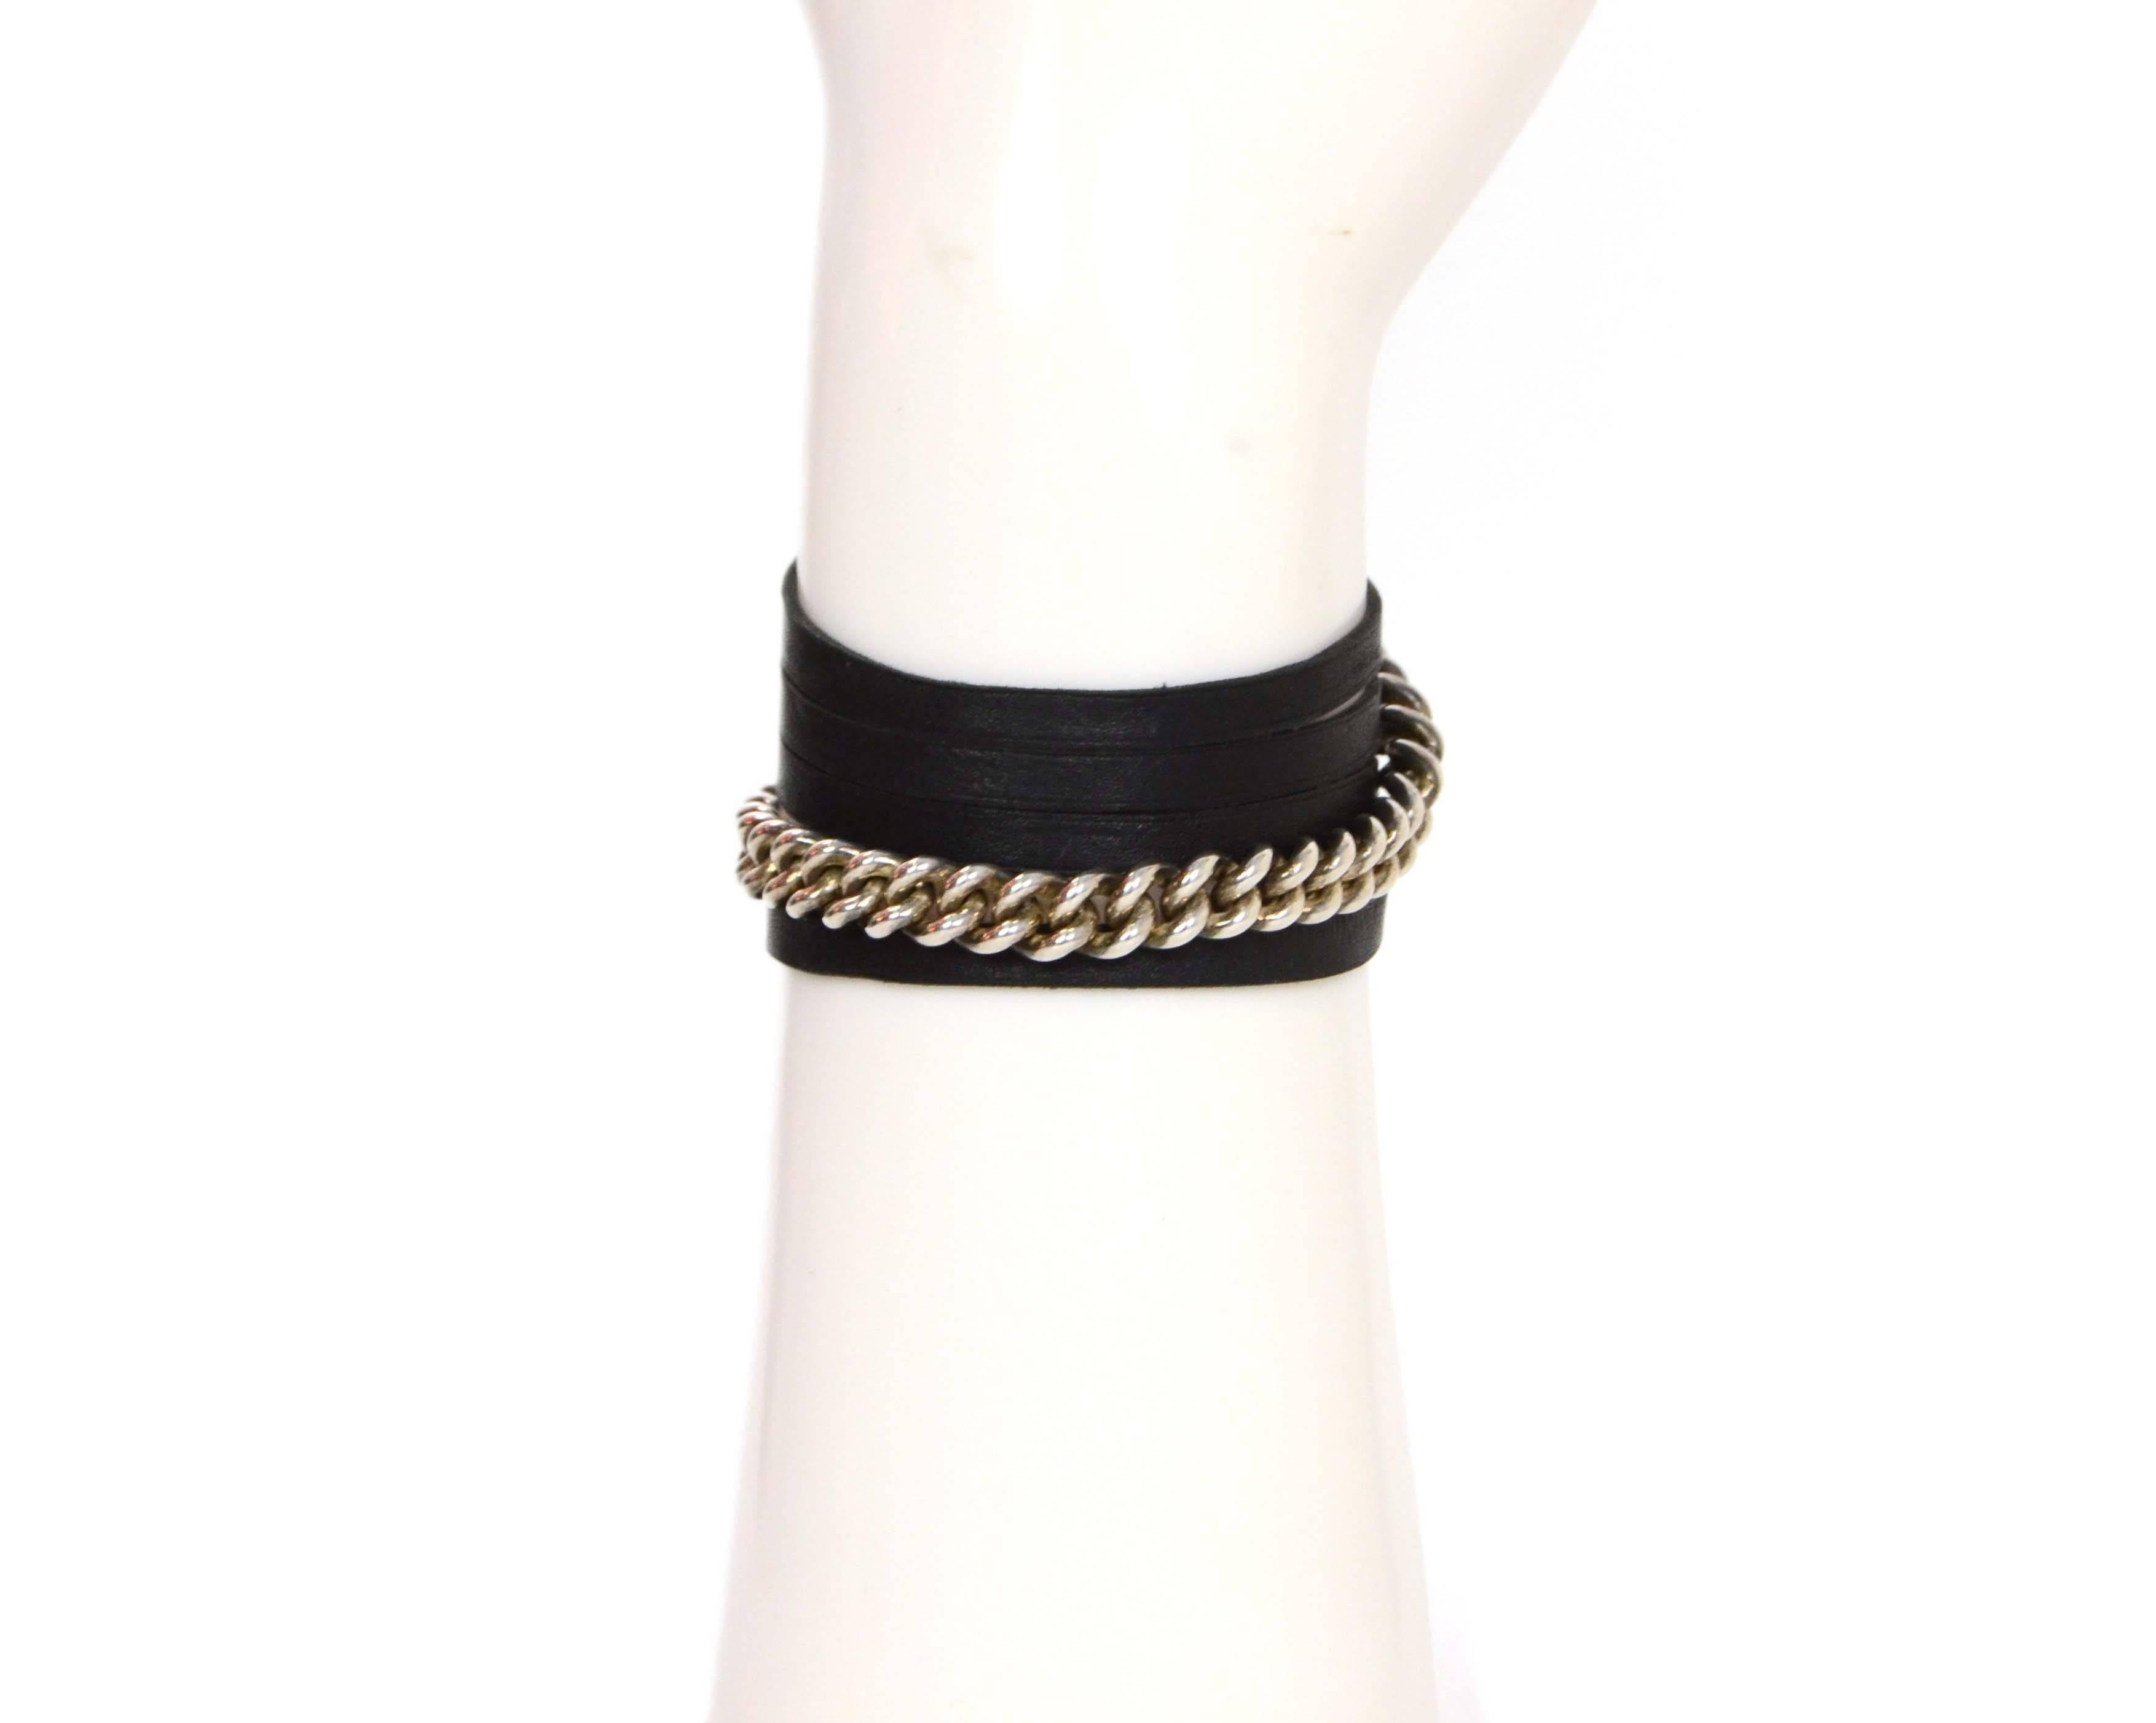 Hermes Silver & Black Leather Wrap Bracelet/Necklace
Color: Silvertone and black
Materials: Metal and leather
Closure: Tie closure
Overall Condition: Excellent pre-owned condition
Measurements: 
Total Length: 37.5